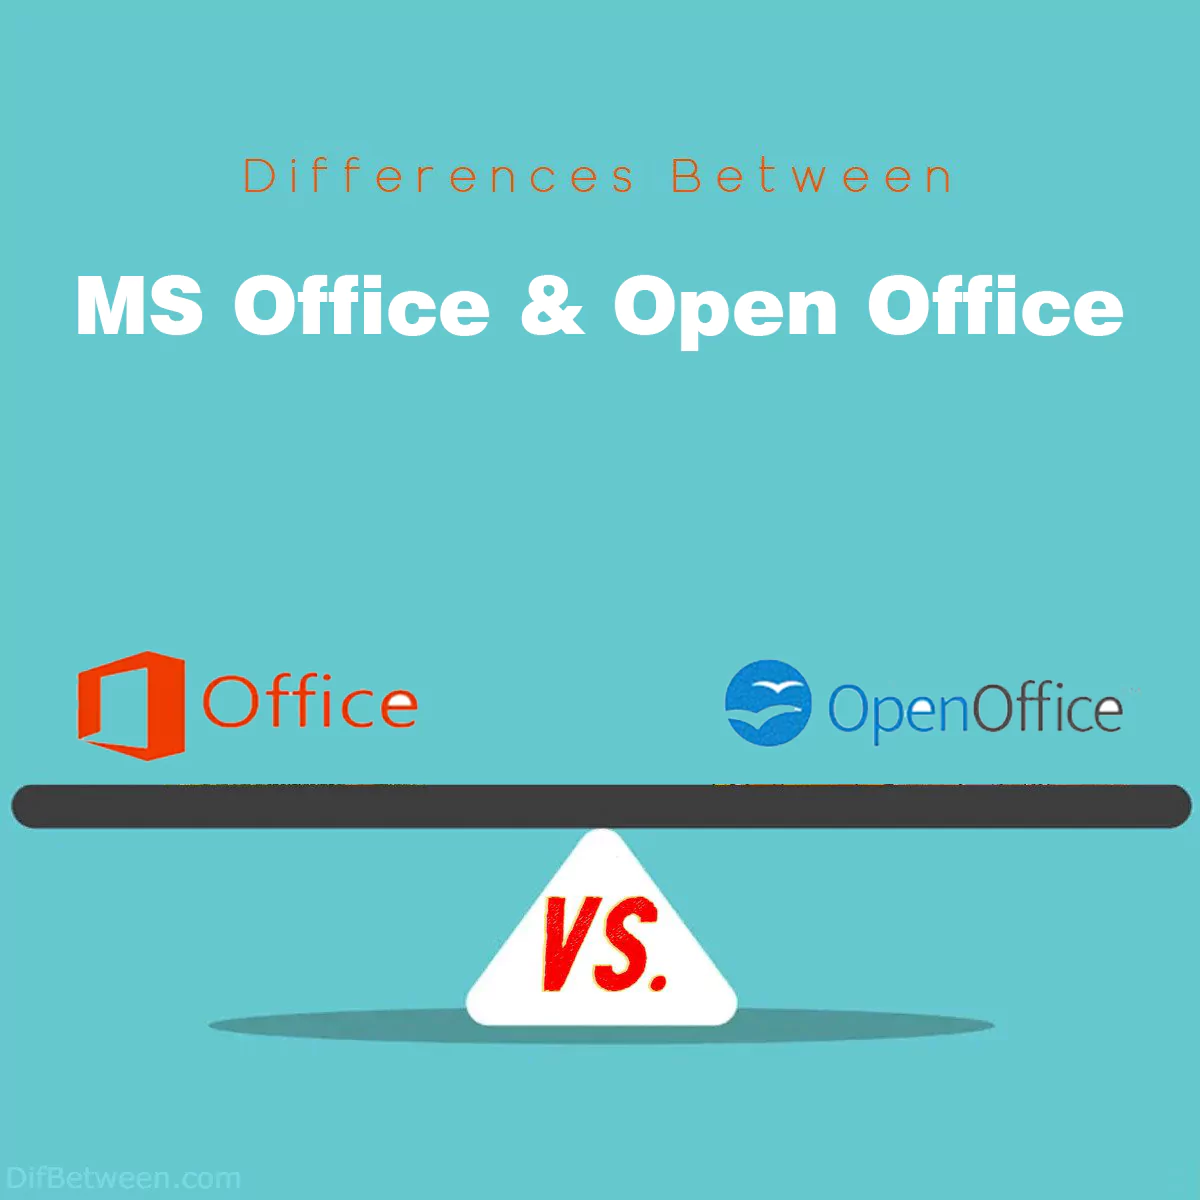 Differences Between MS Office and Open Office